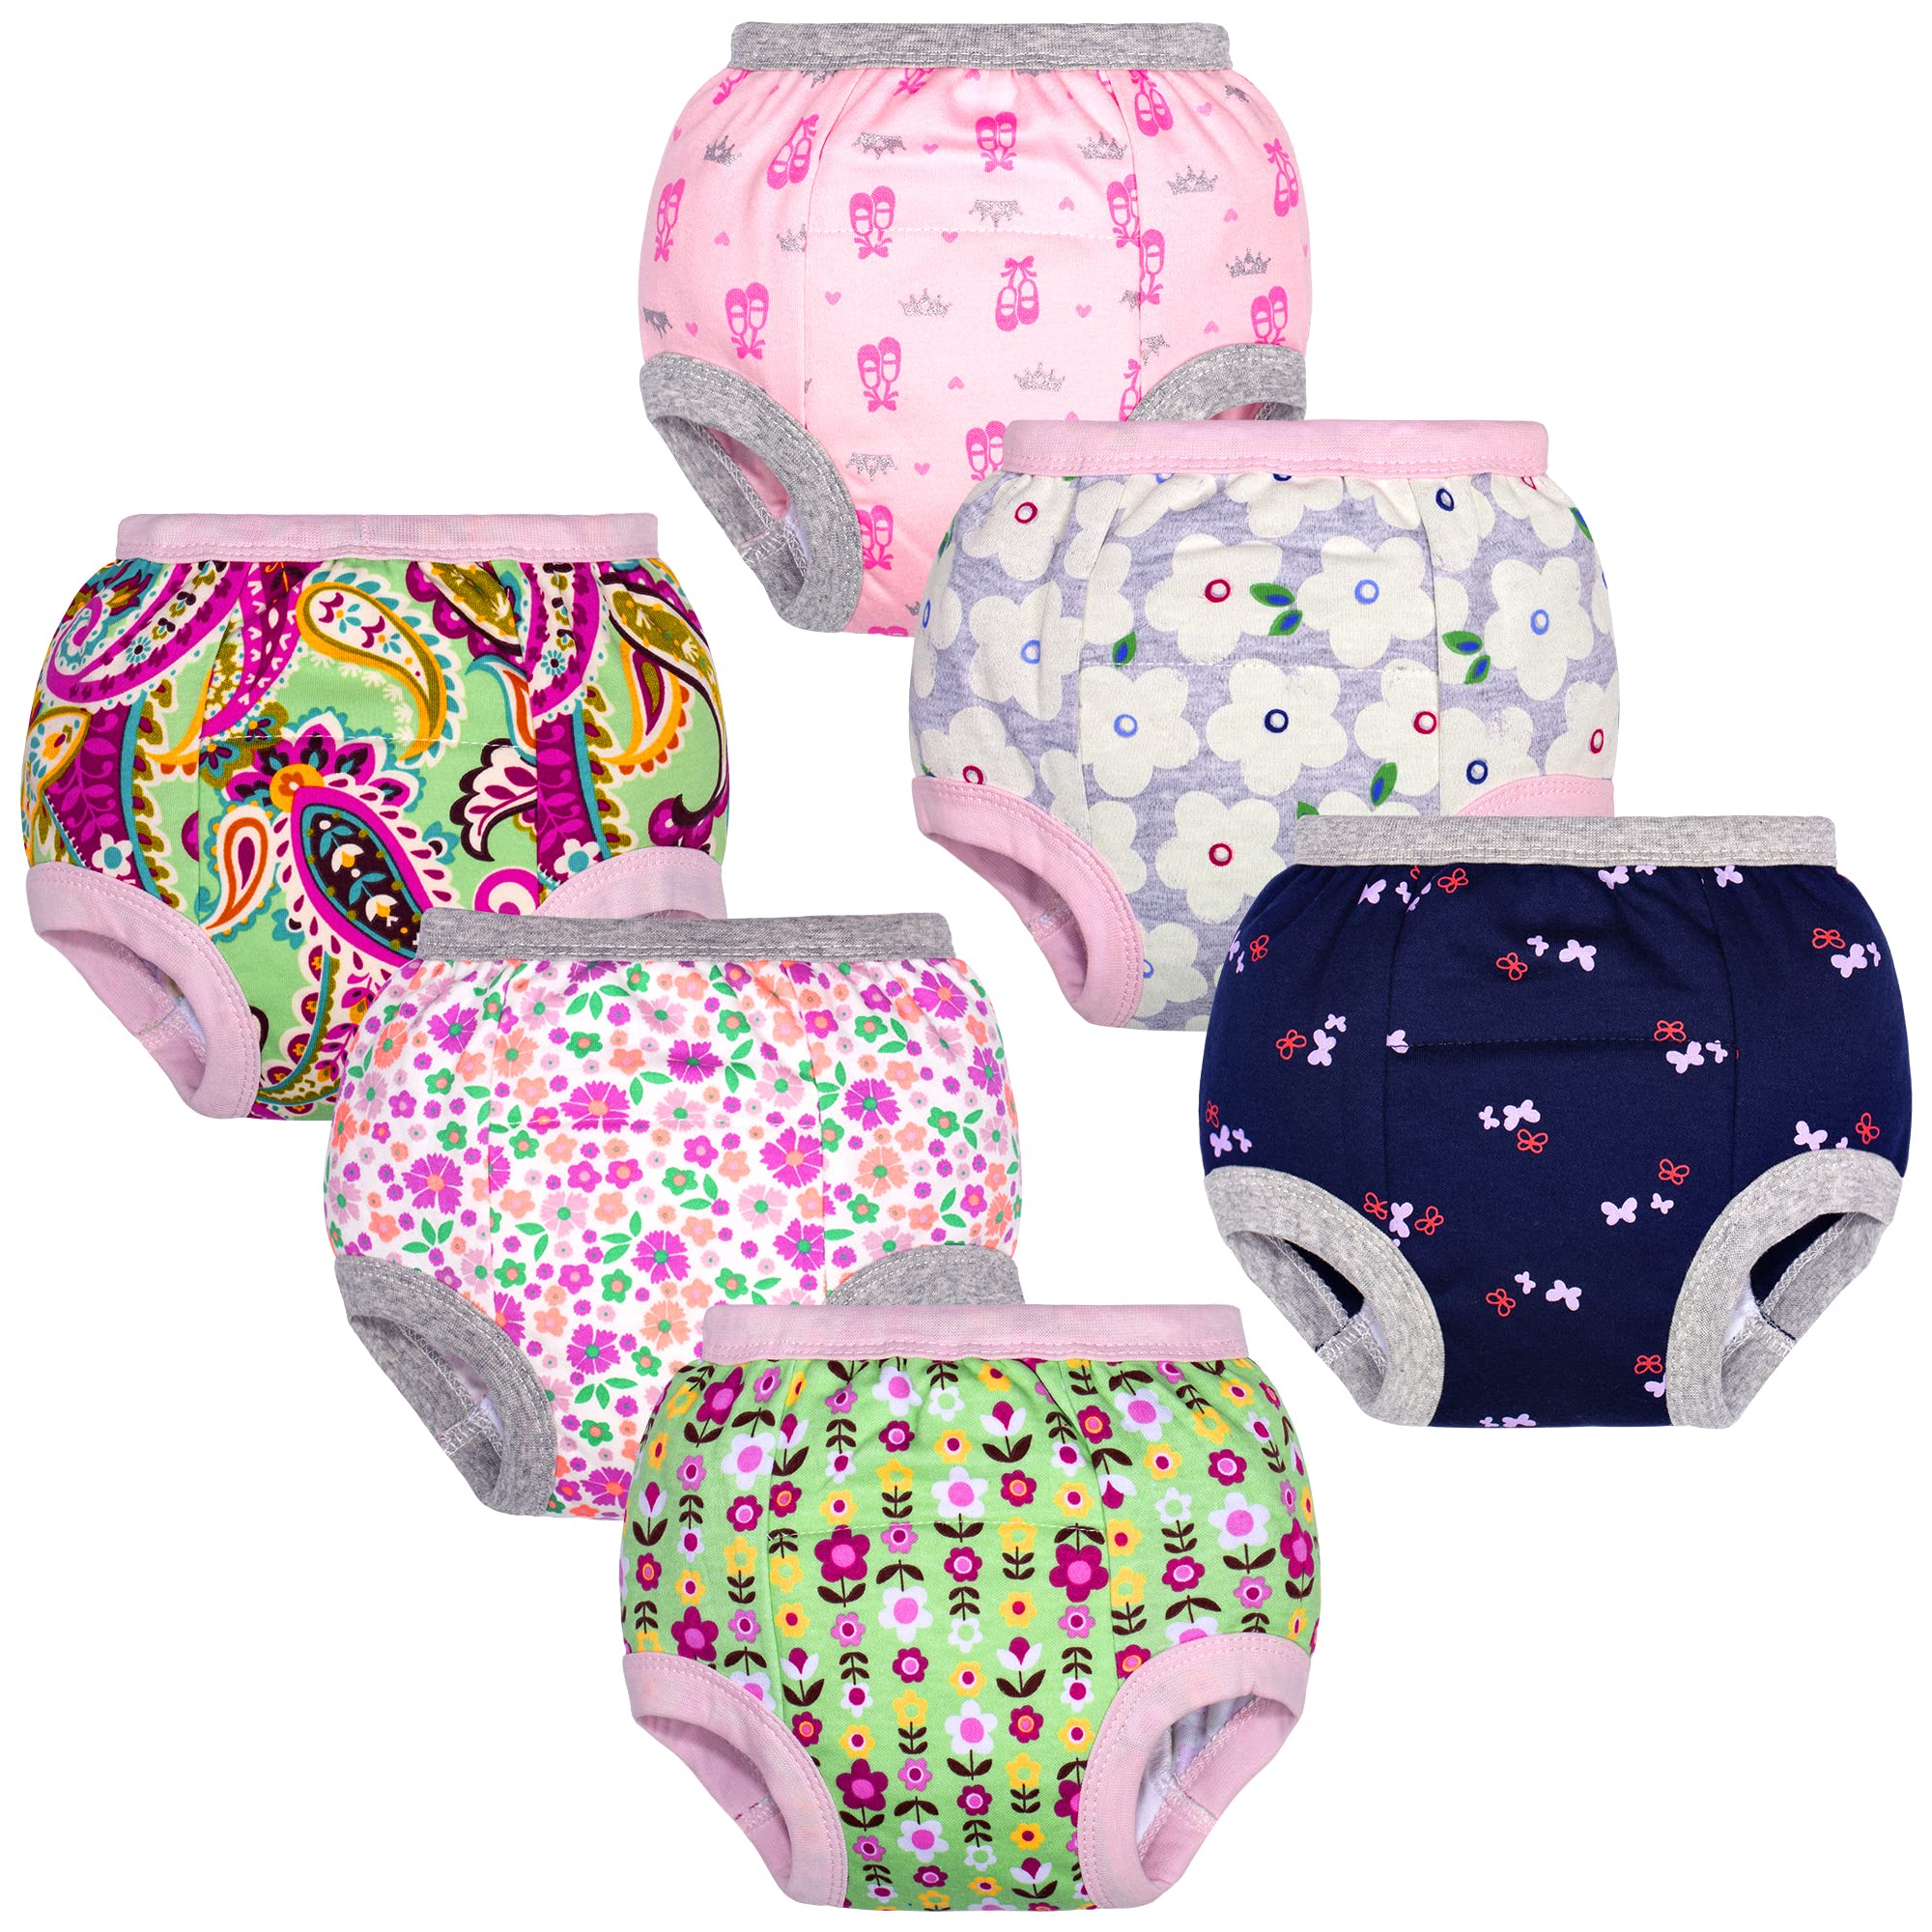  Potty Training Underwear, 100% Cotton Absorbent Unisex  Toddler Pee Pants For Boys & Girls, 12-24 Months